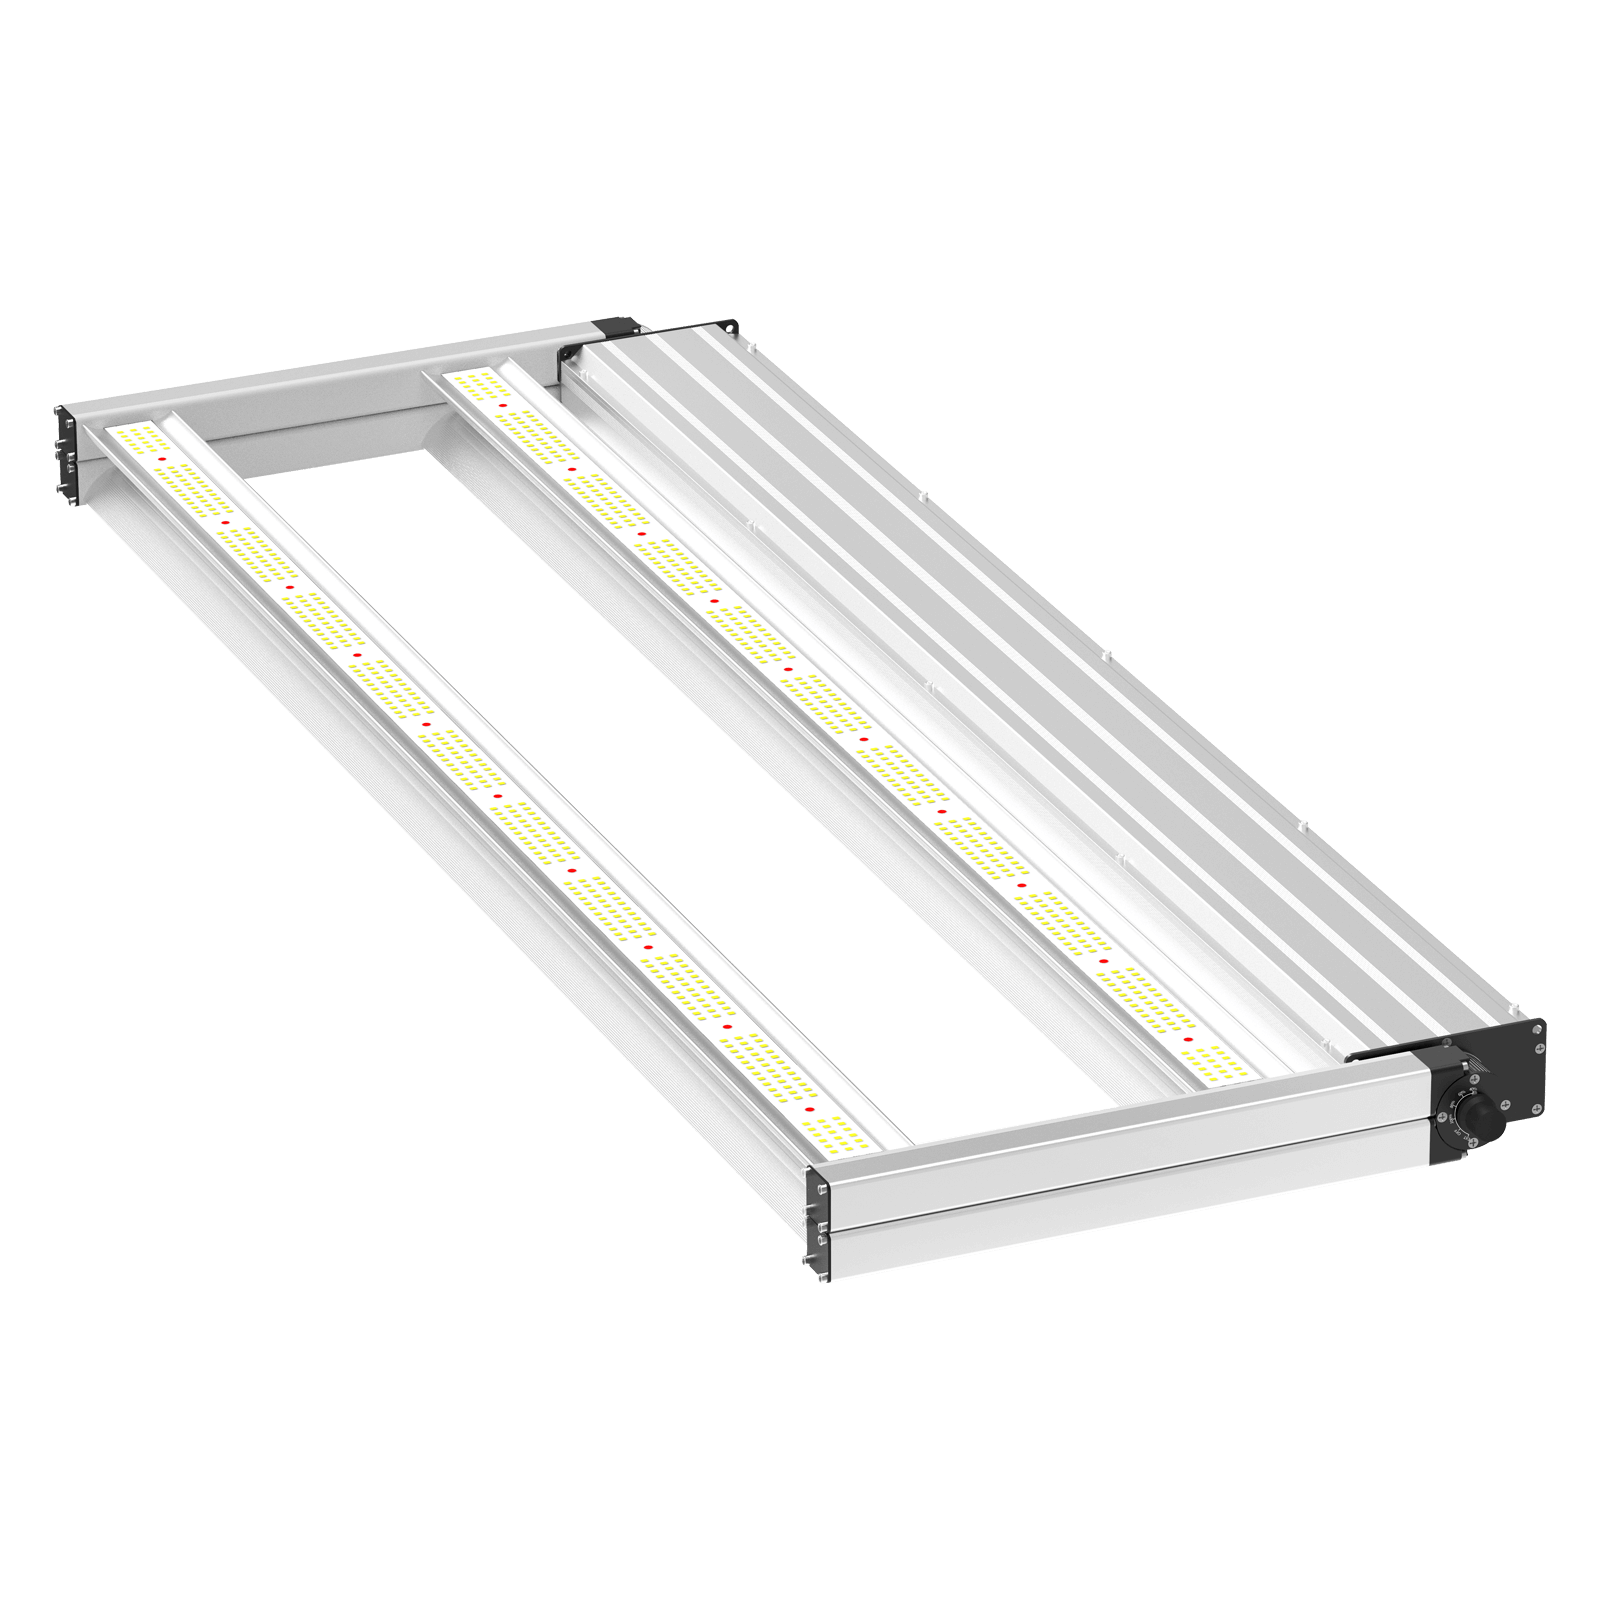 CT-250 Full Spectrum LED Grow Light - 250W, 2.7 μmol/J, Dimmable, 984 pcs Diodes | Cultiuana-4